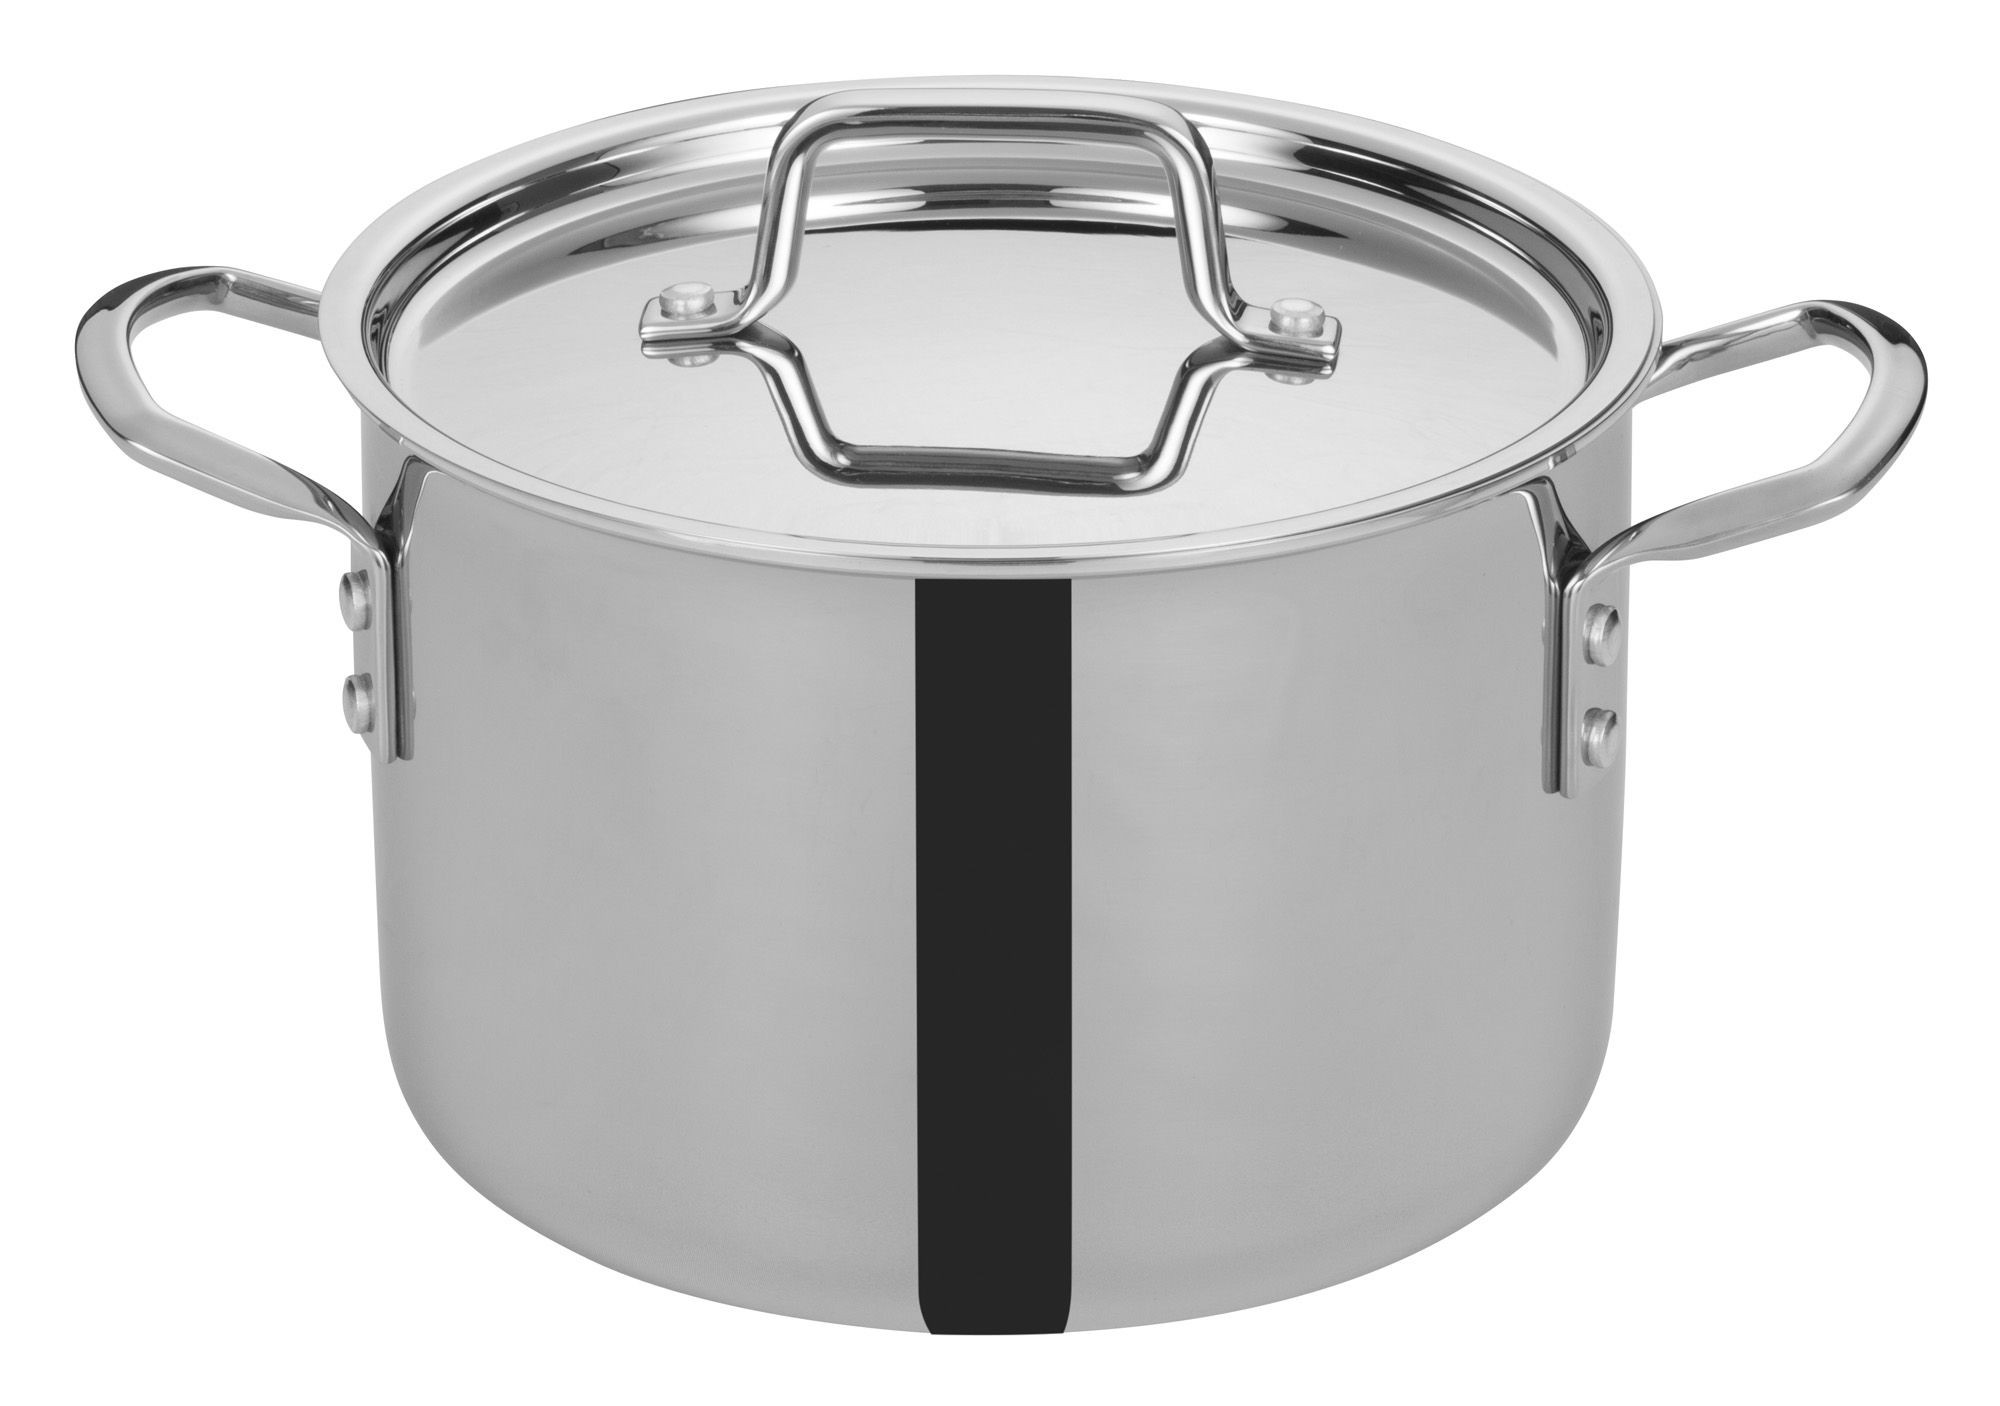 https://www.lionsdeal.com/itempics/Winco-TGSP-6-Tri-Ply-Stainless-Steel-6-Qt--Stock-Pot-with-Cover-38450_xlarge.jpg